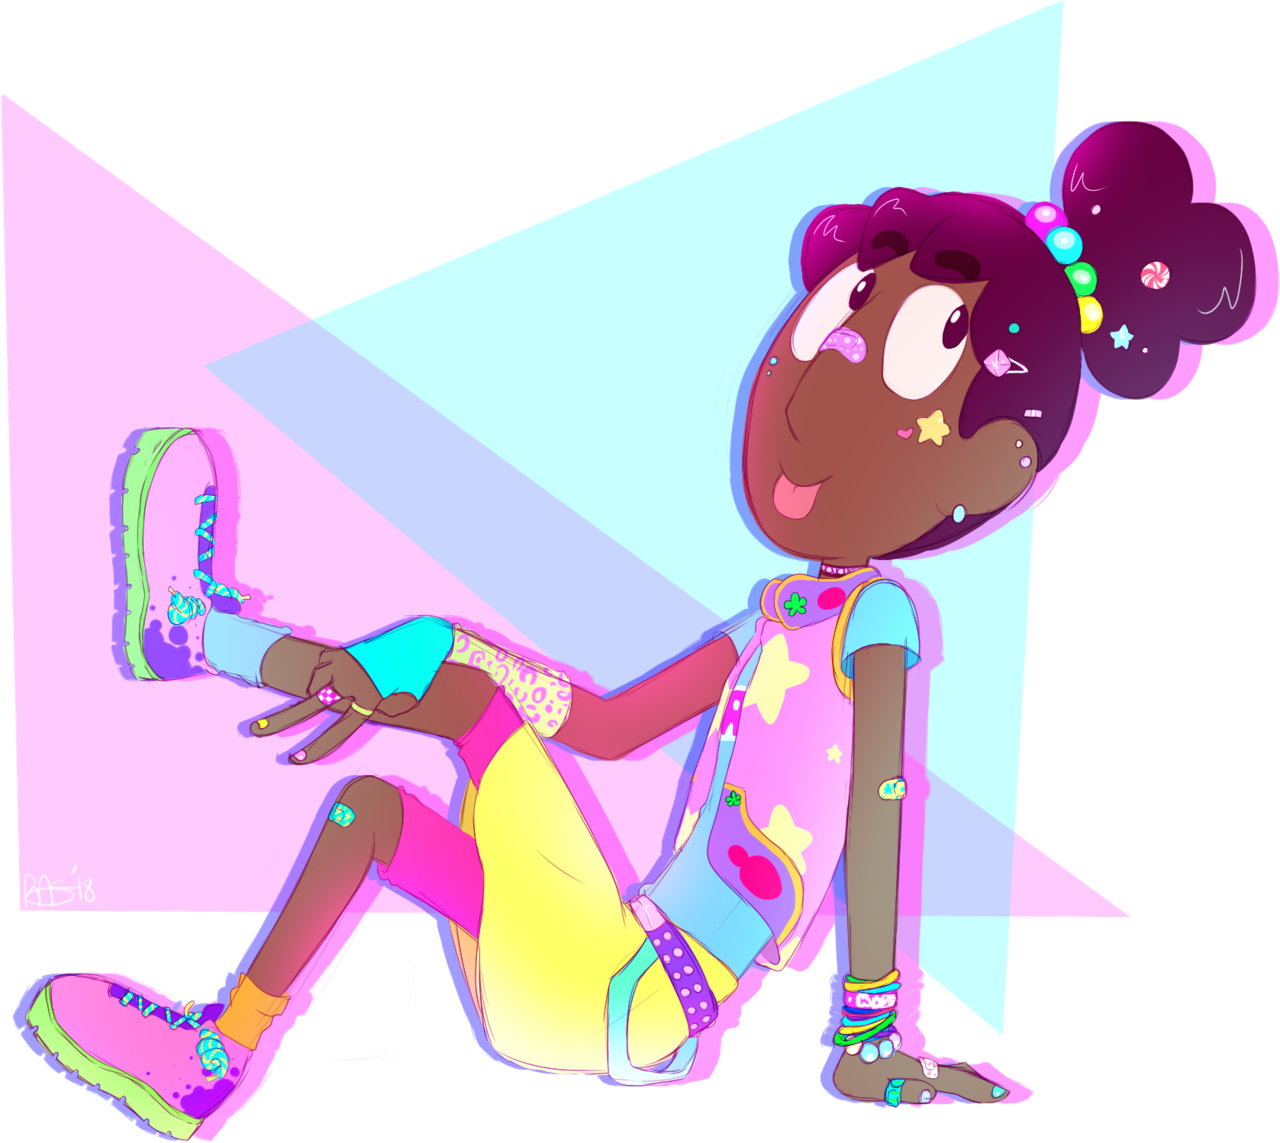 Connie! Inspired by 90′s aesthetic and Lisa Frank type stuff! (Sorry for the awkward cropping, my art program isn’t working correctly atm!)